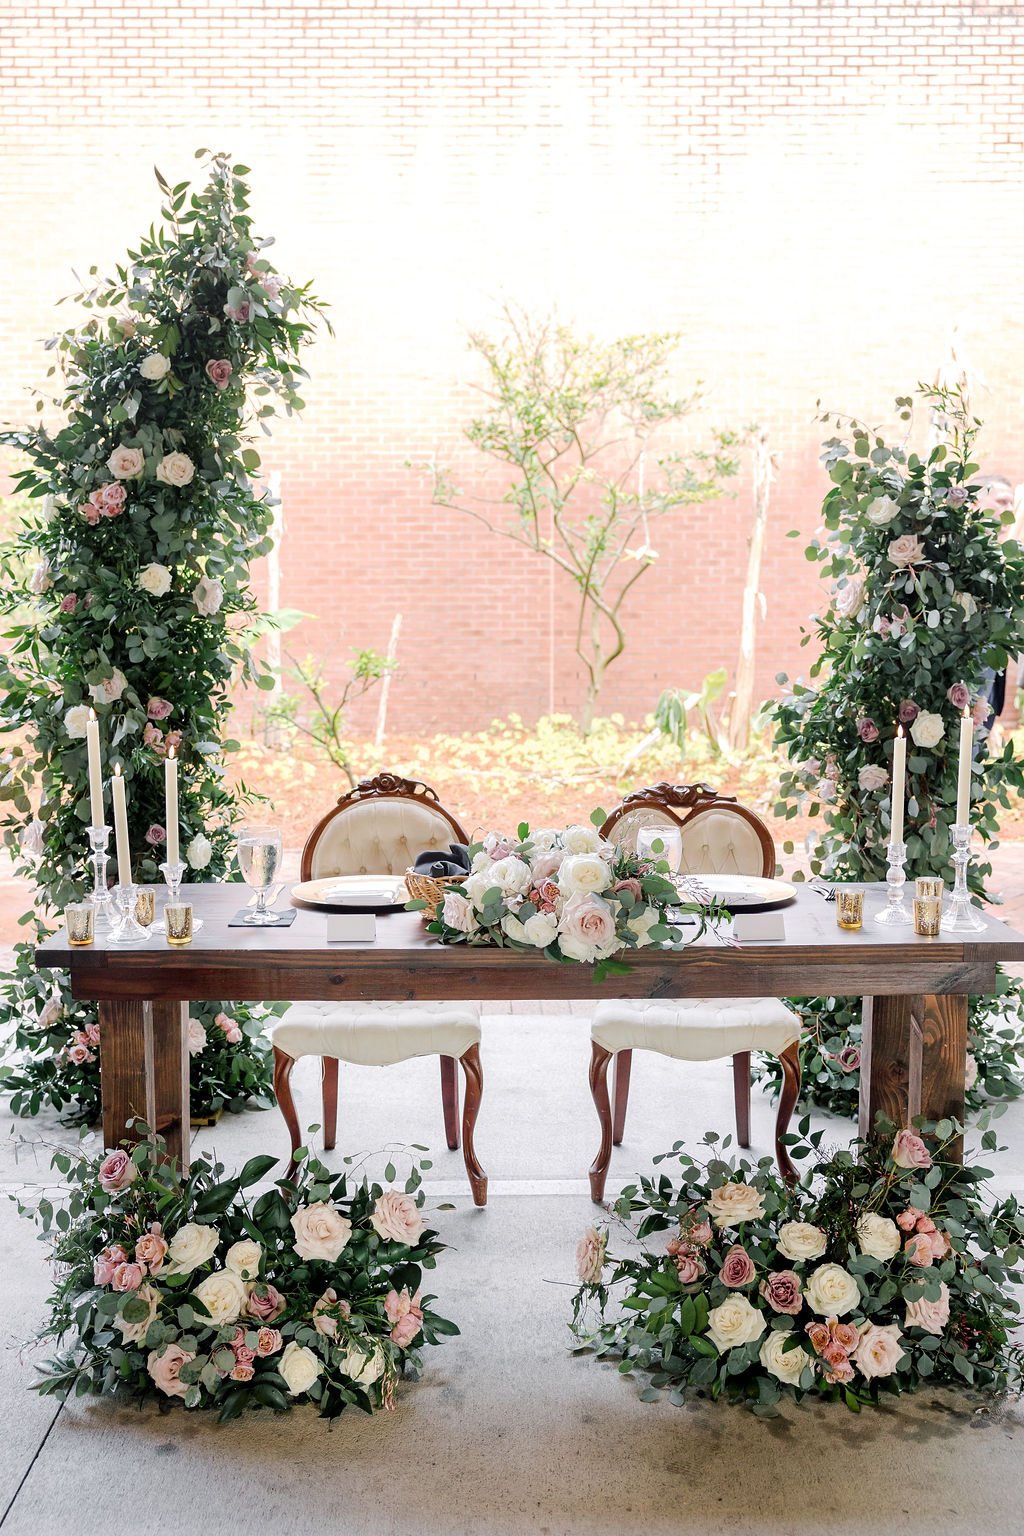 sweetheart table decor and flowers